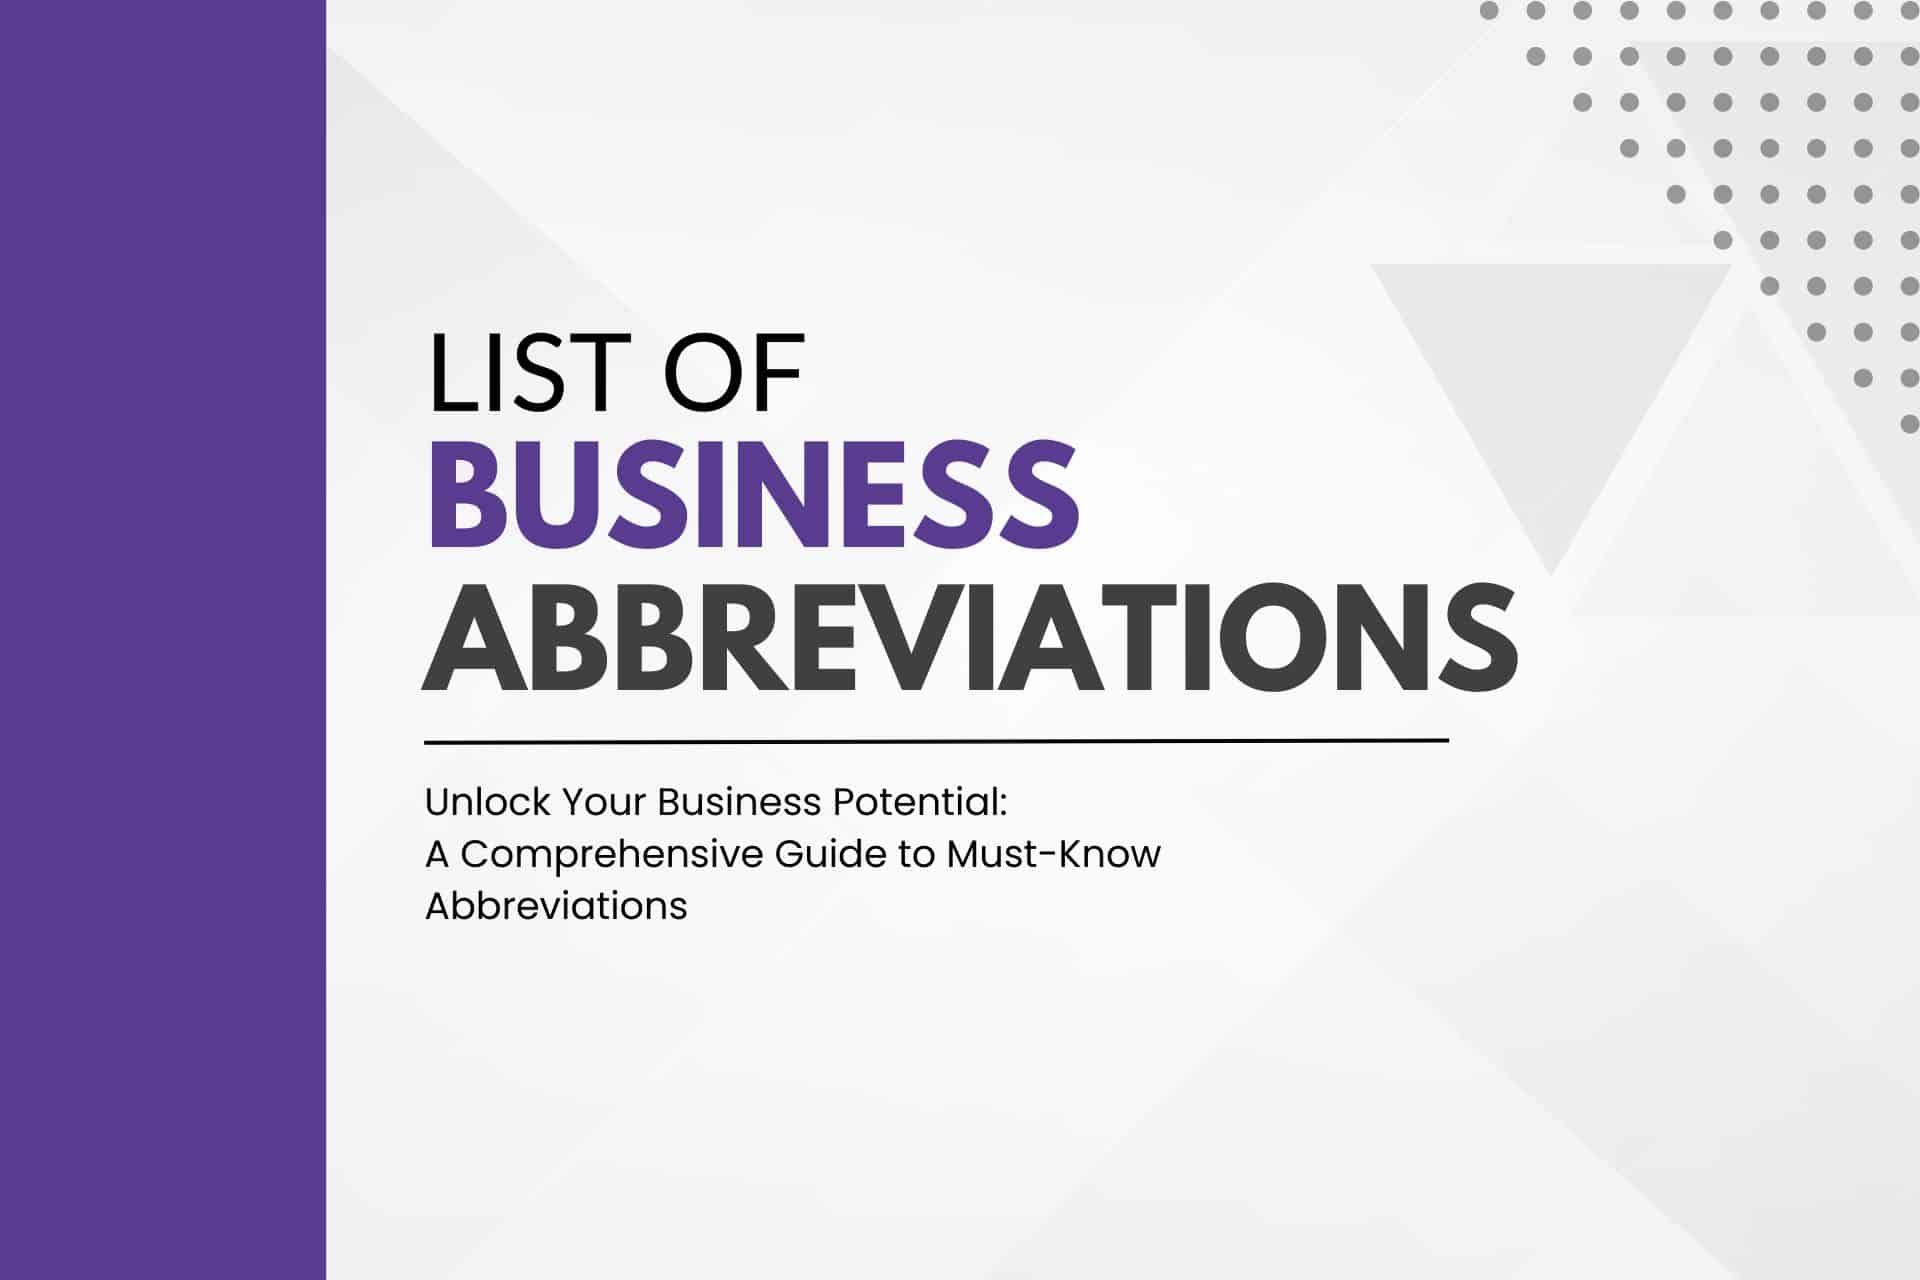 List of Business Abbreviations